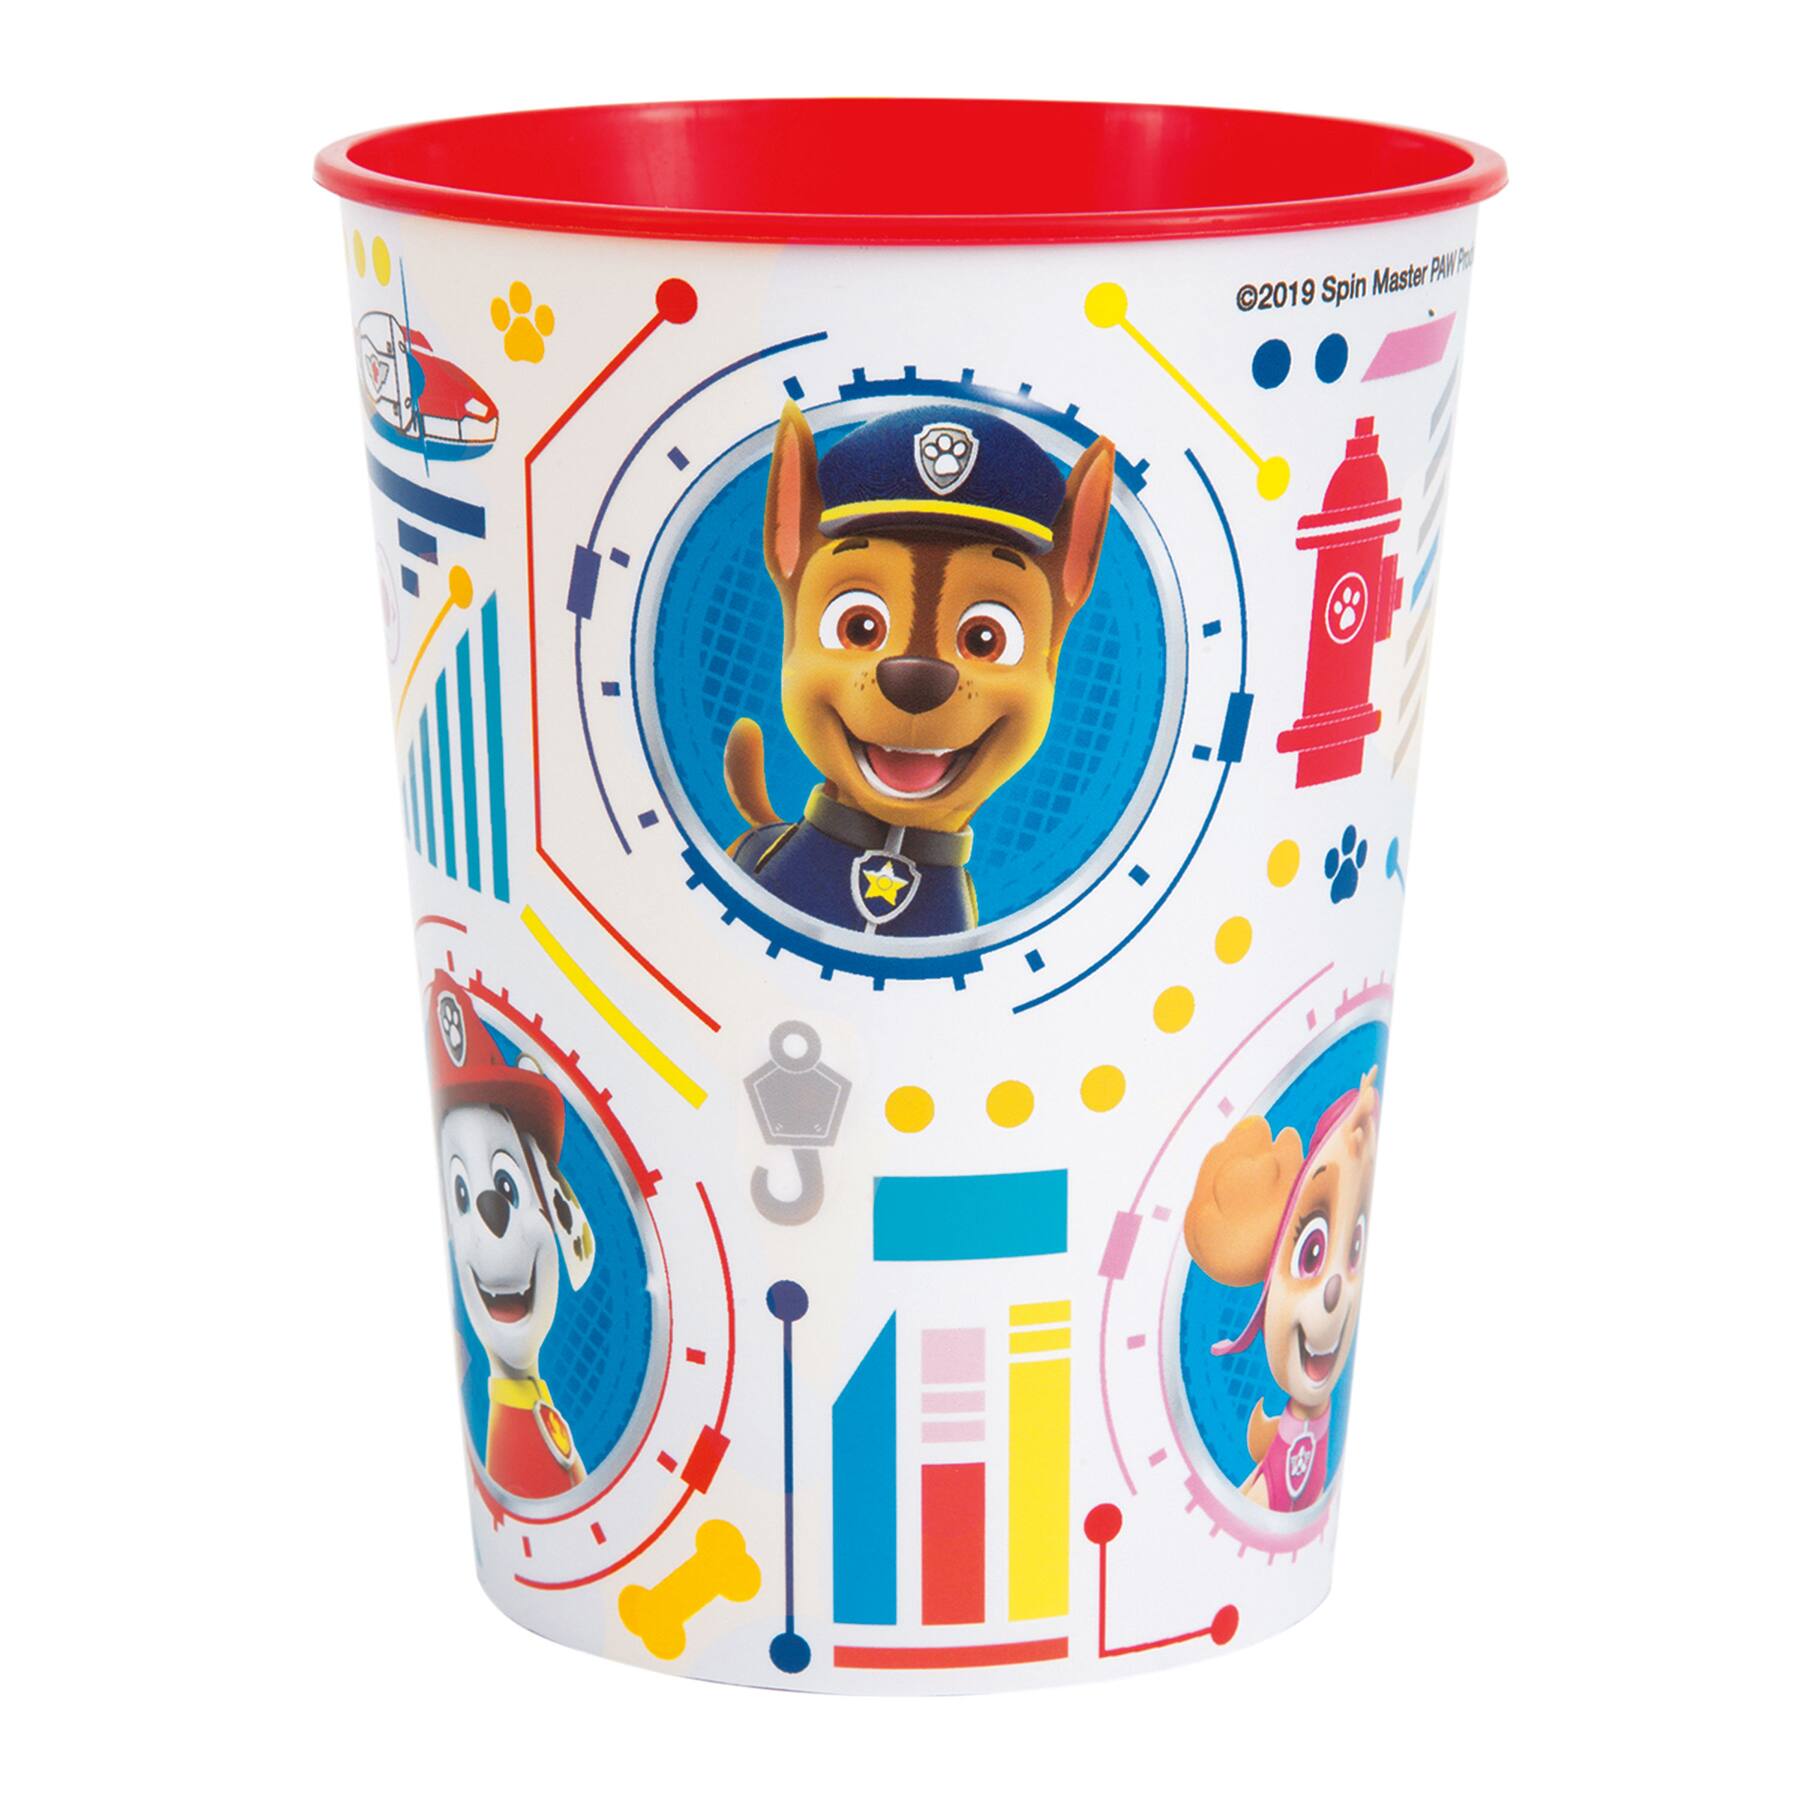 Paw patrol fan mug perfect present for your son or daughter for birthday ot any occasion Mug decorated with Marshall from paw patrol